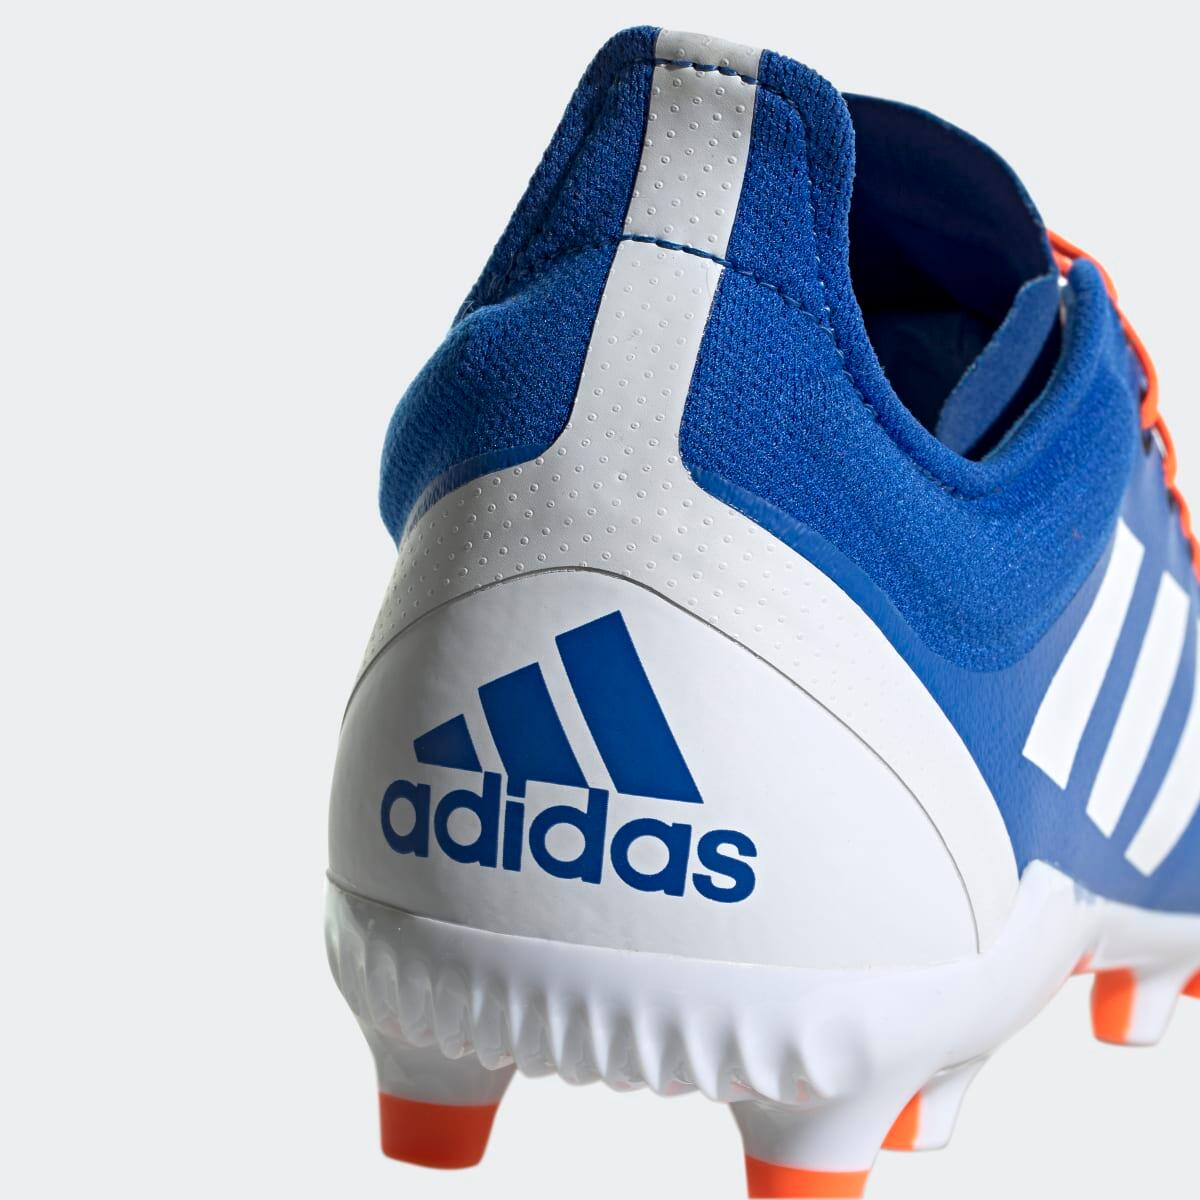 Adidas Predator XP Firm Ground Rugby Boots 6/7